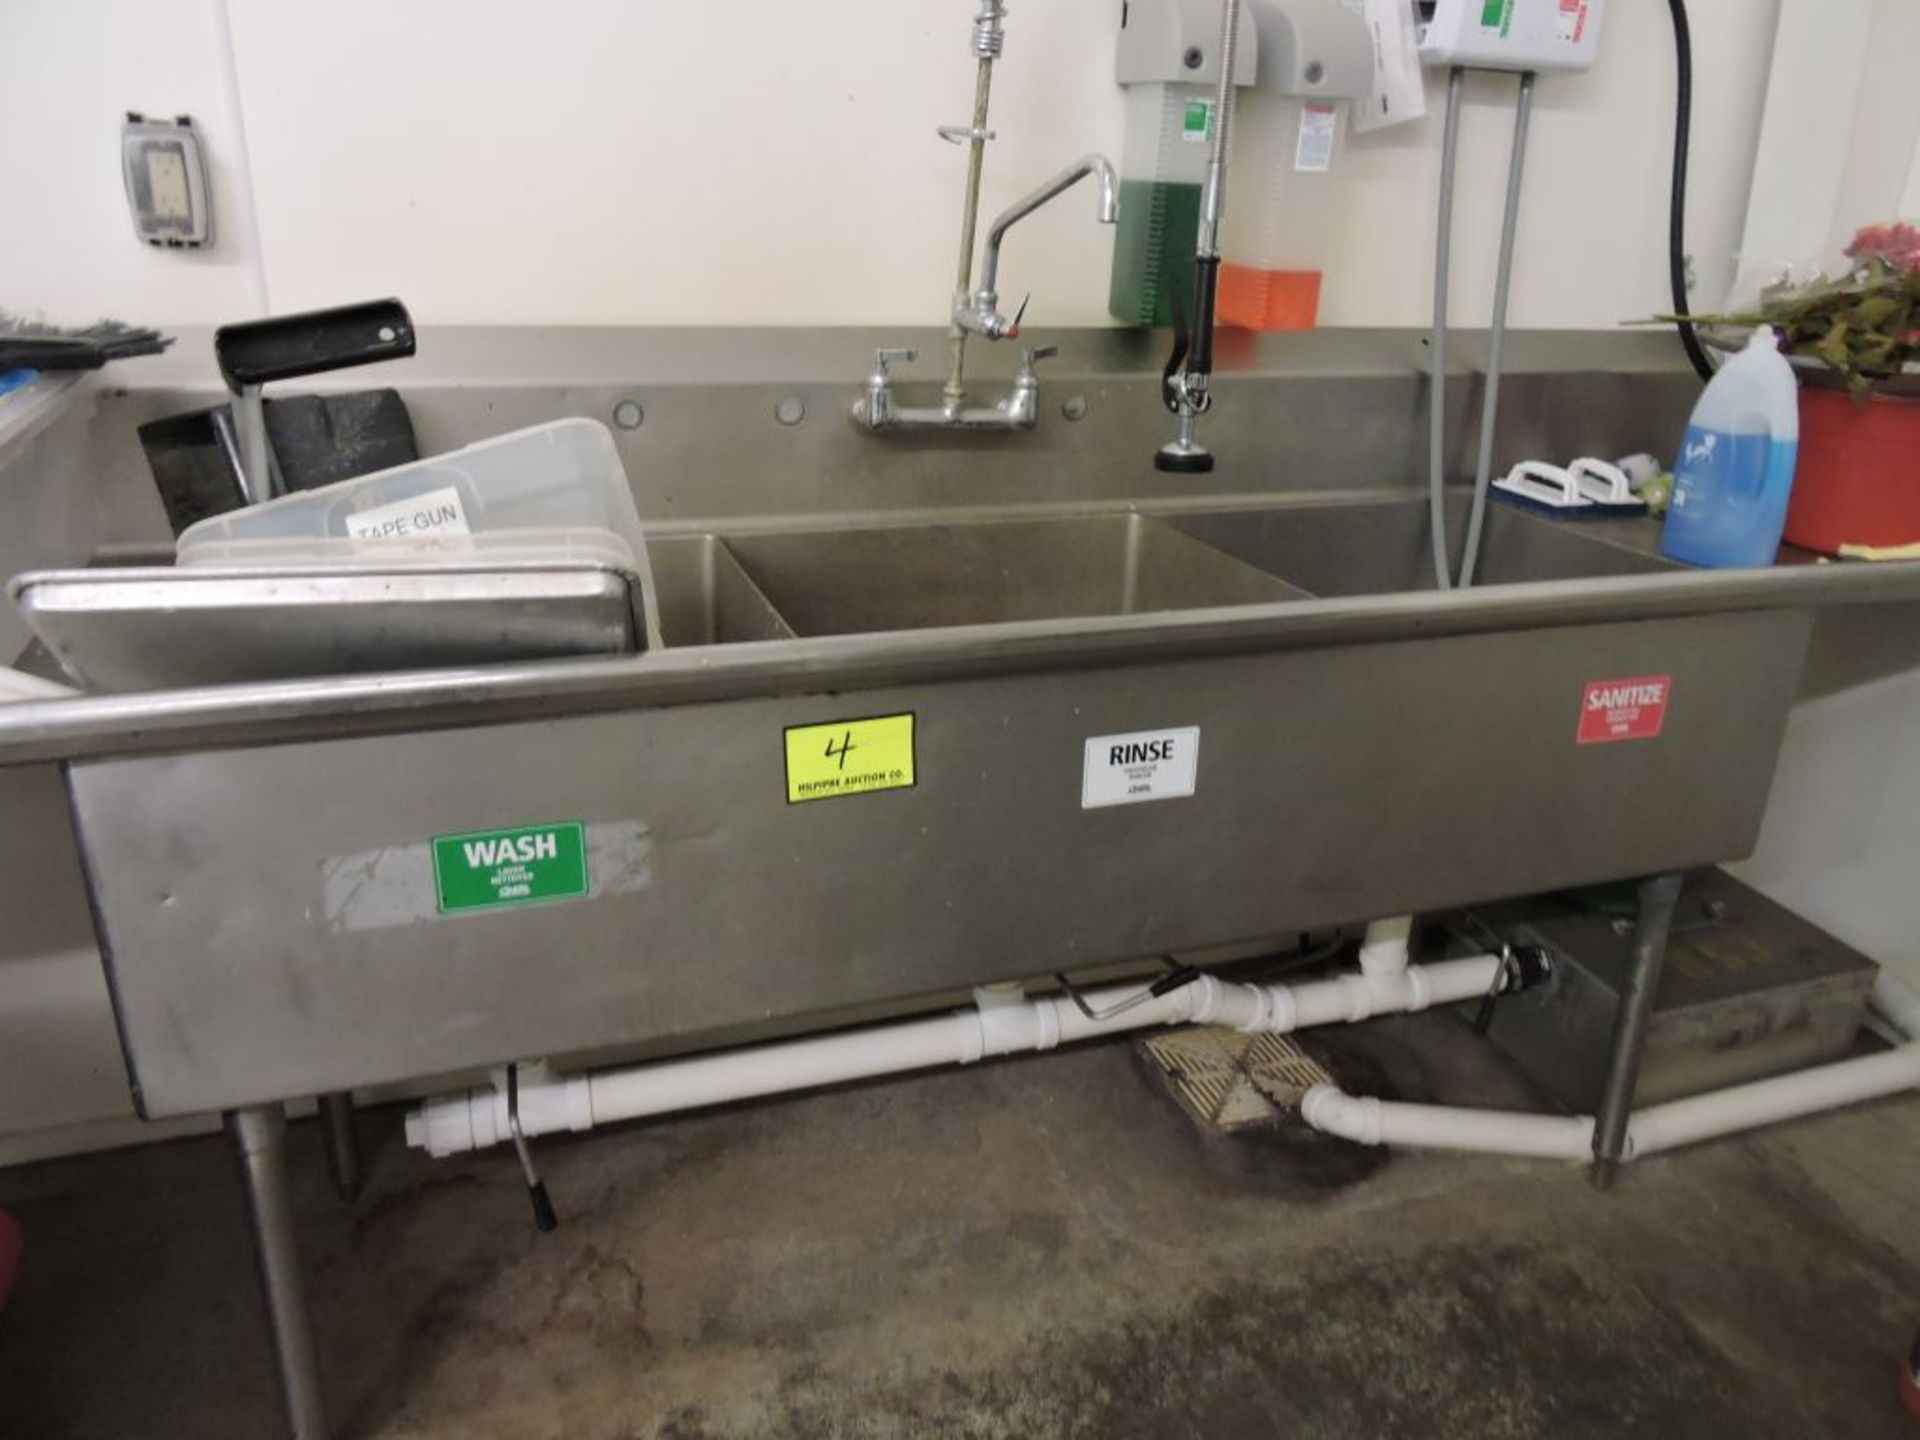 Stainless steel 3 basin sink, with 10' long grease trap. (Loading fee $50)